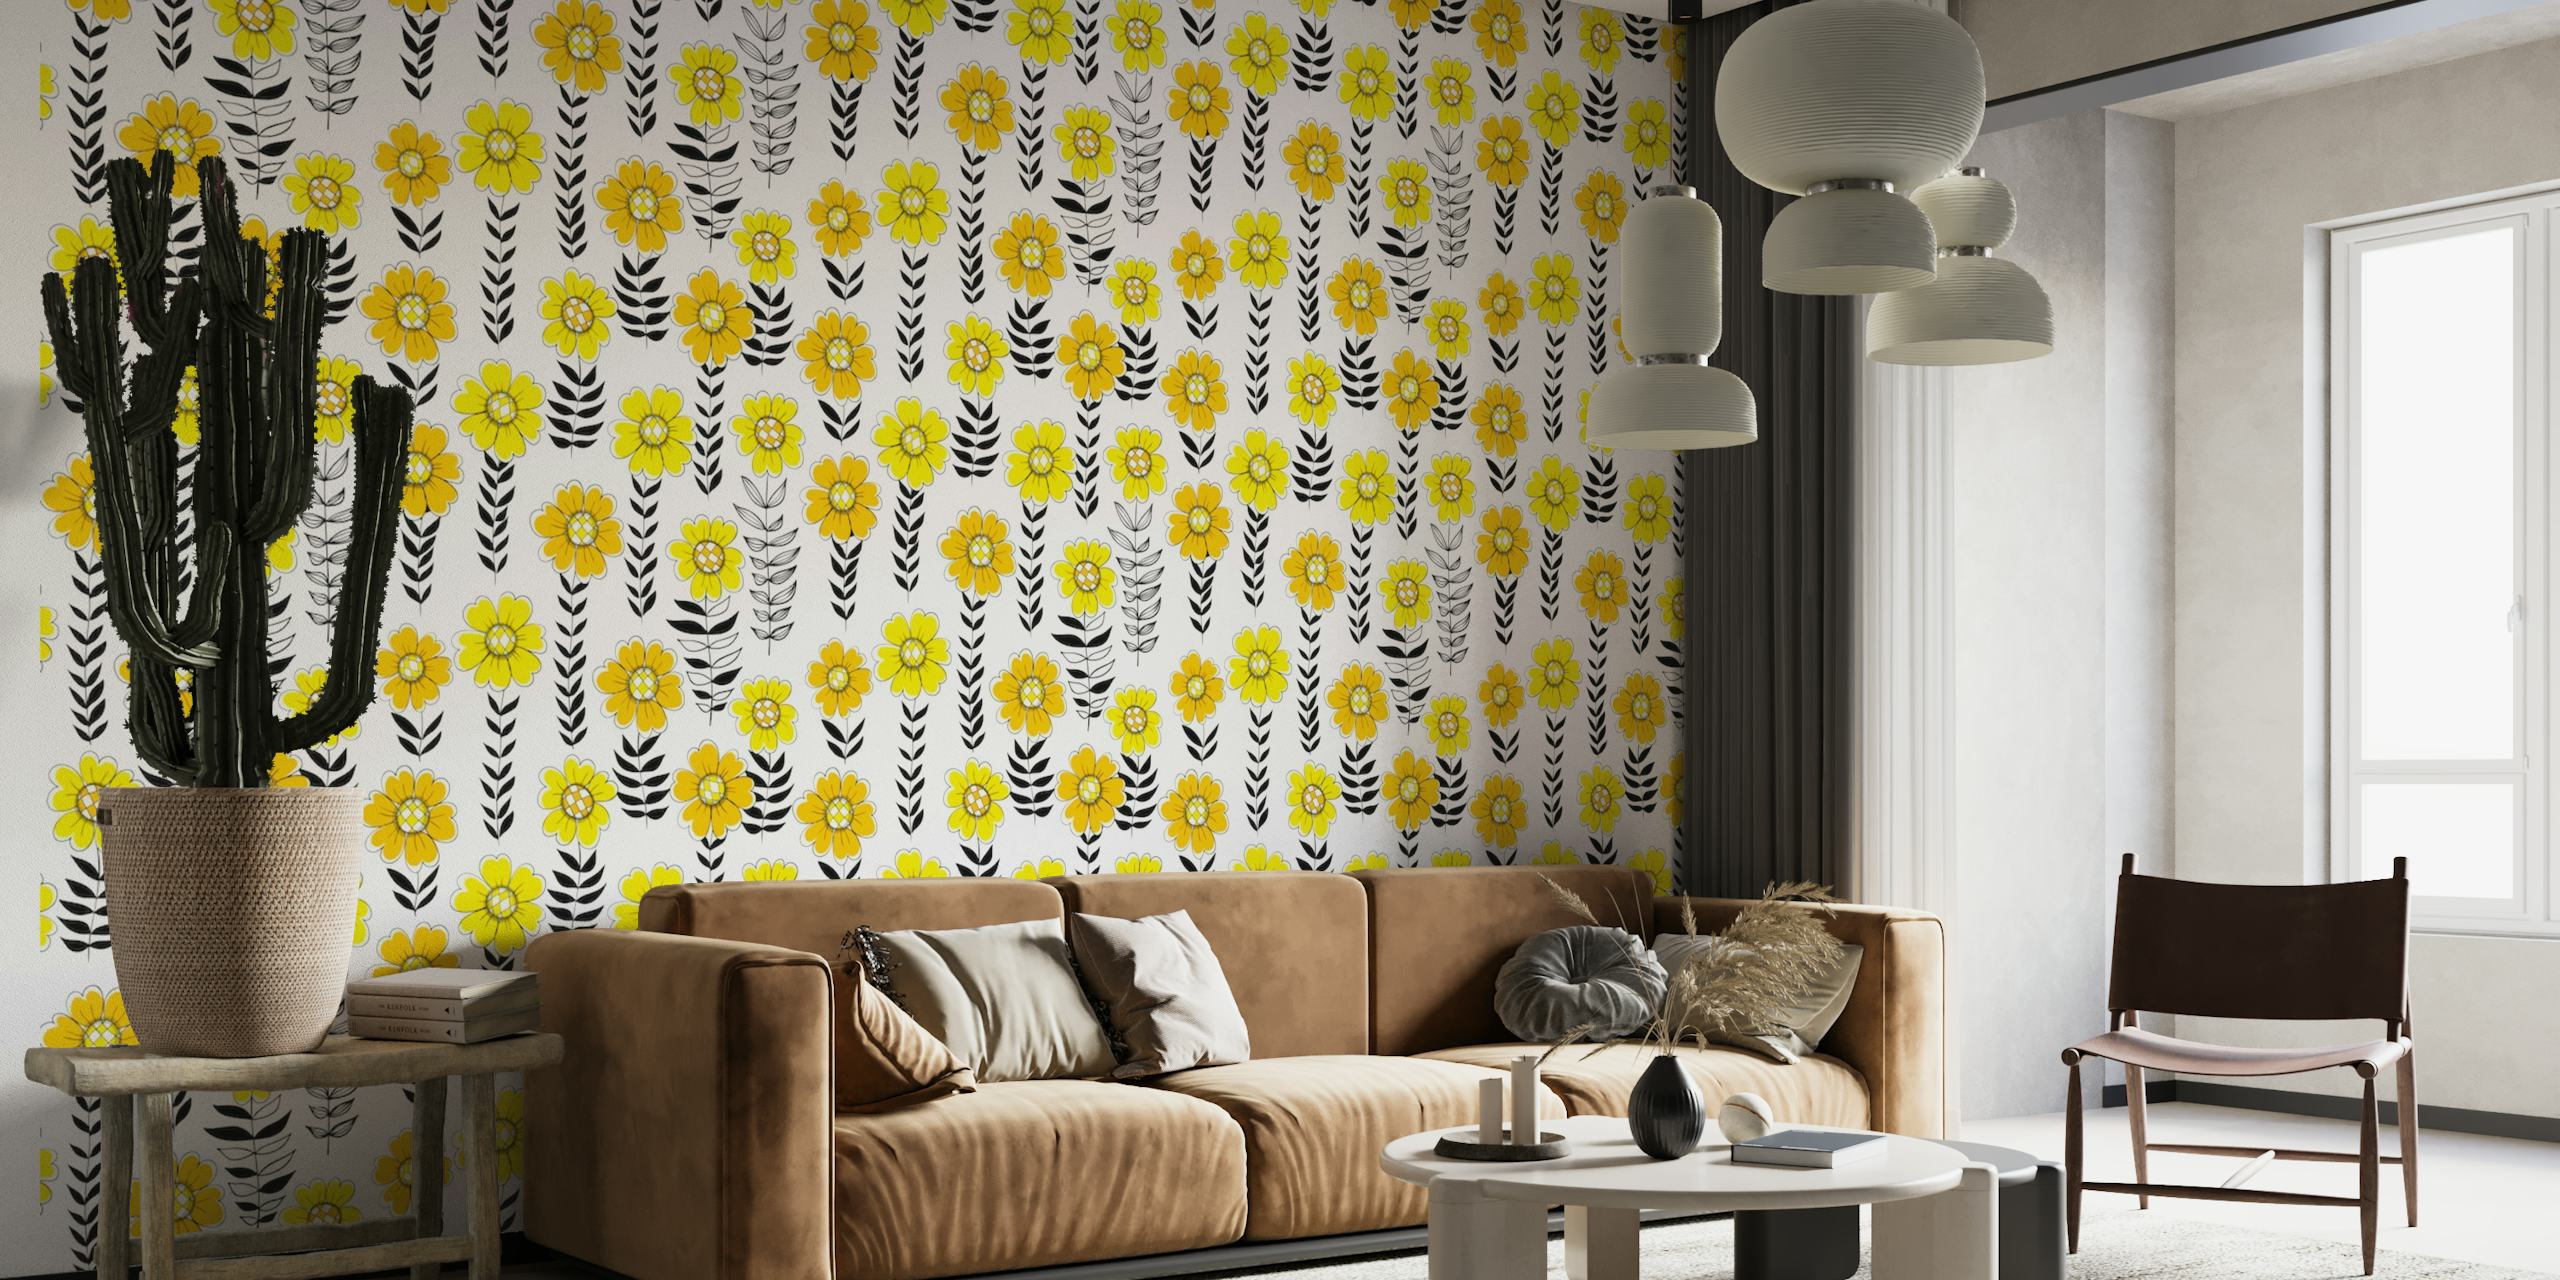 Hand-drawn yellow doodle flowers on a white background wall mural